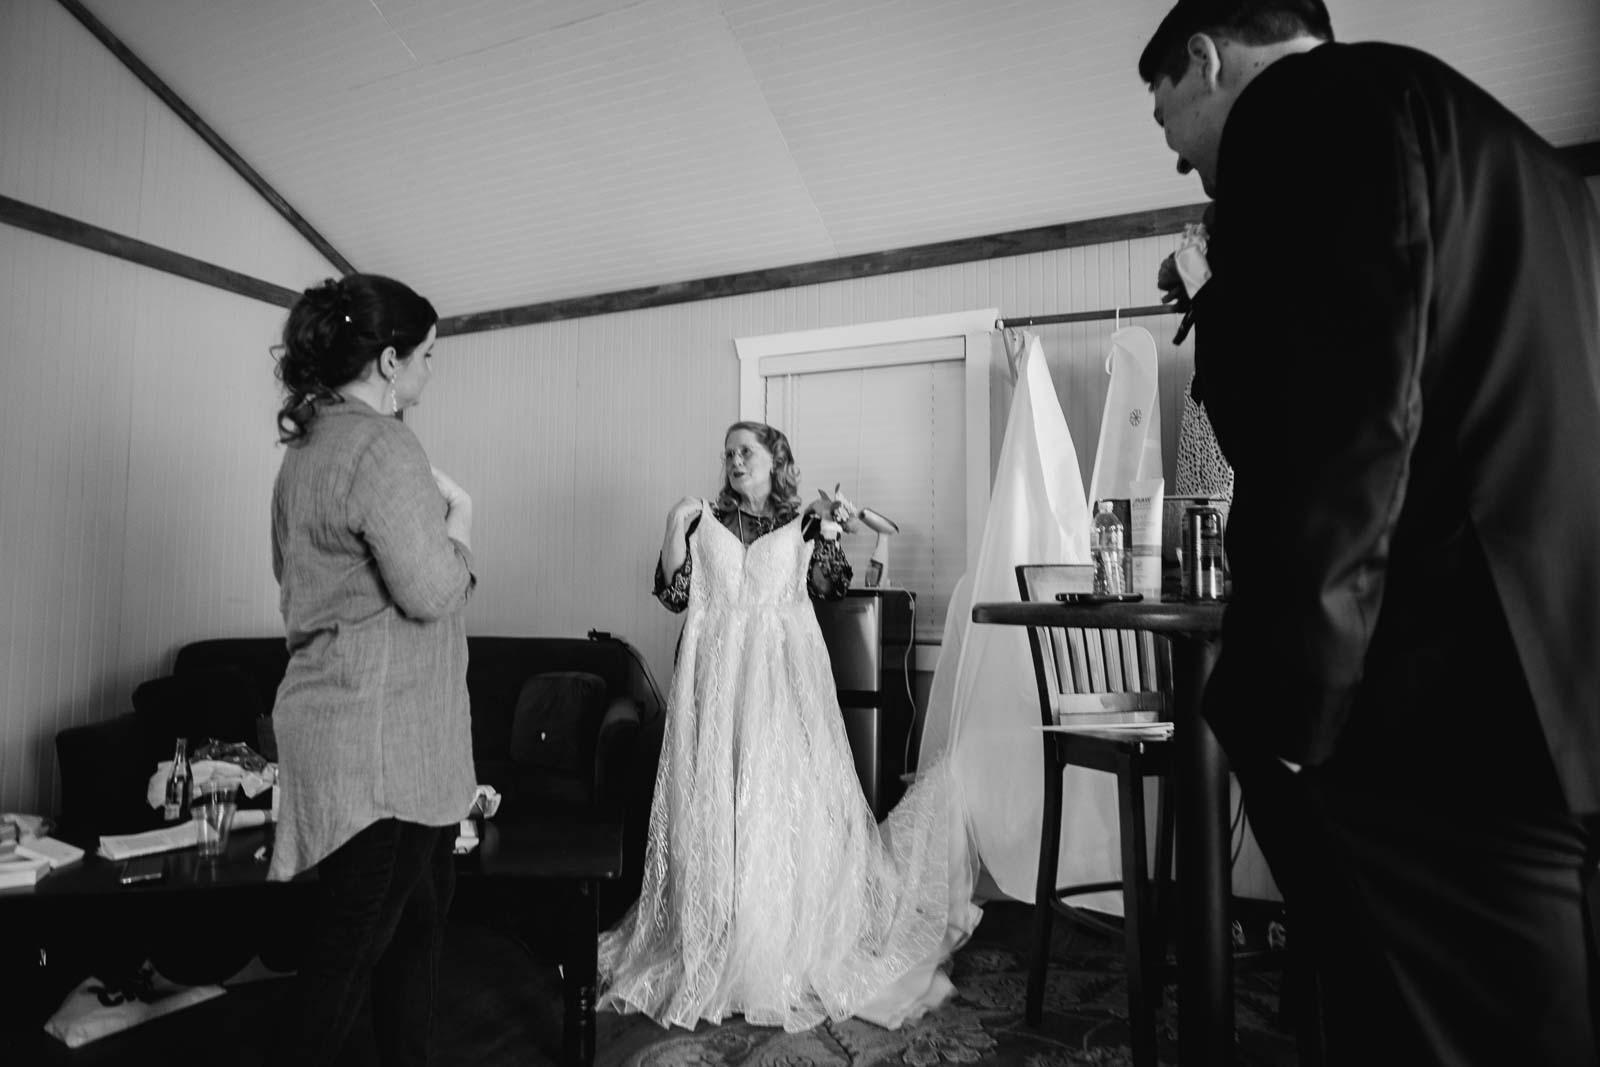 The mother of the bride jokingly hangs the dress up for her to wear